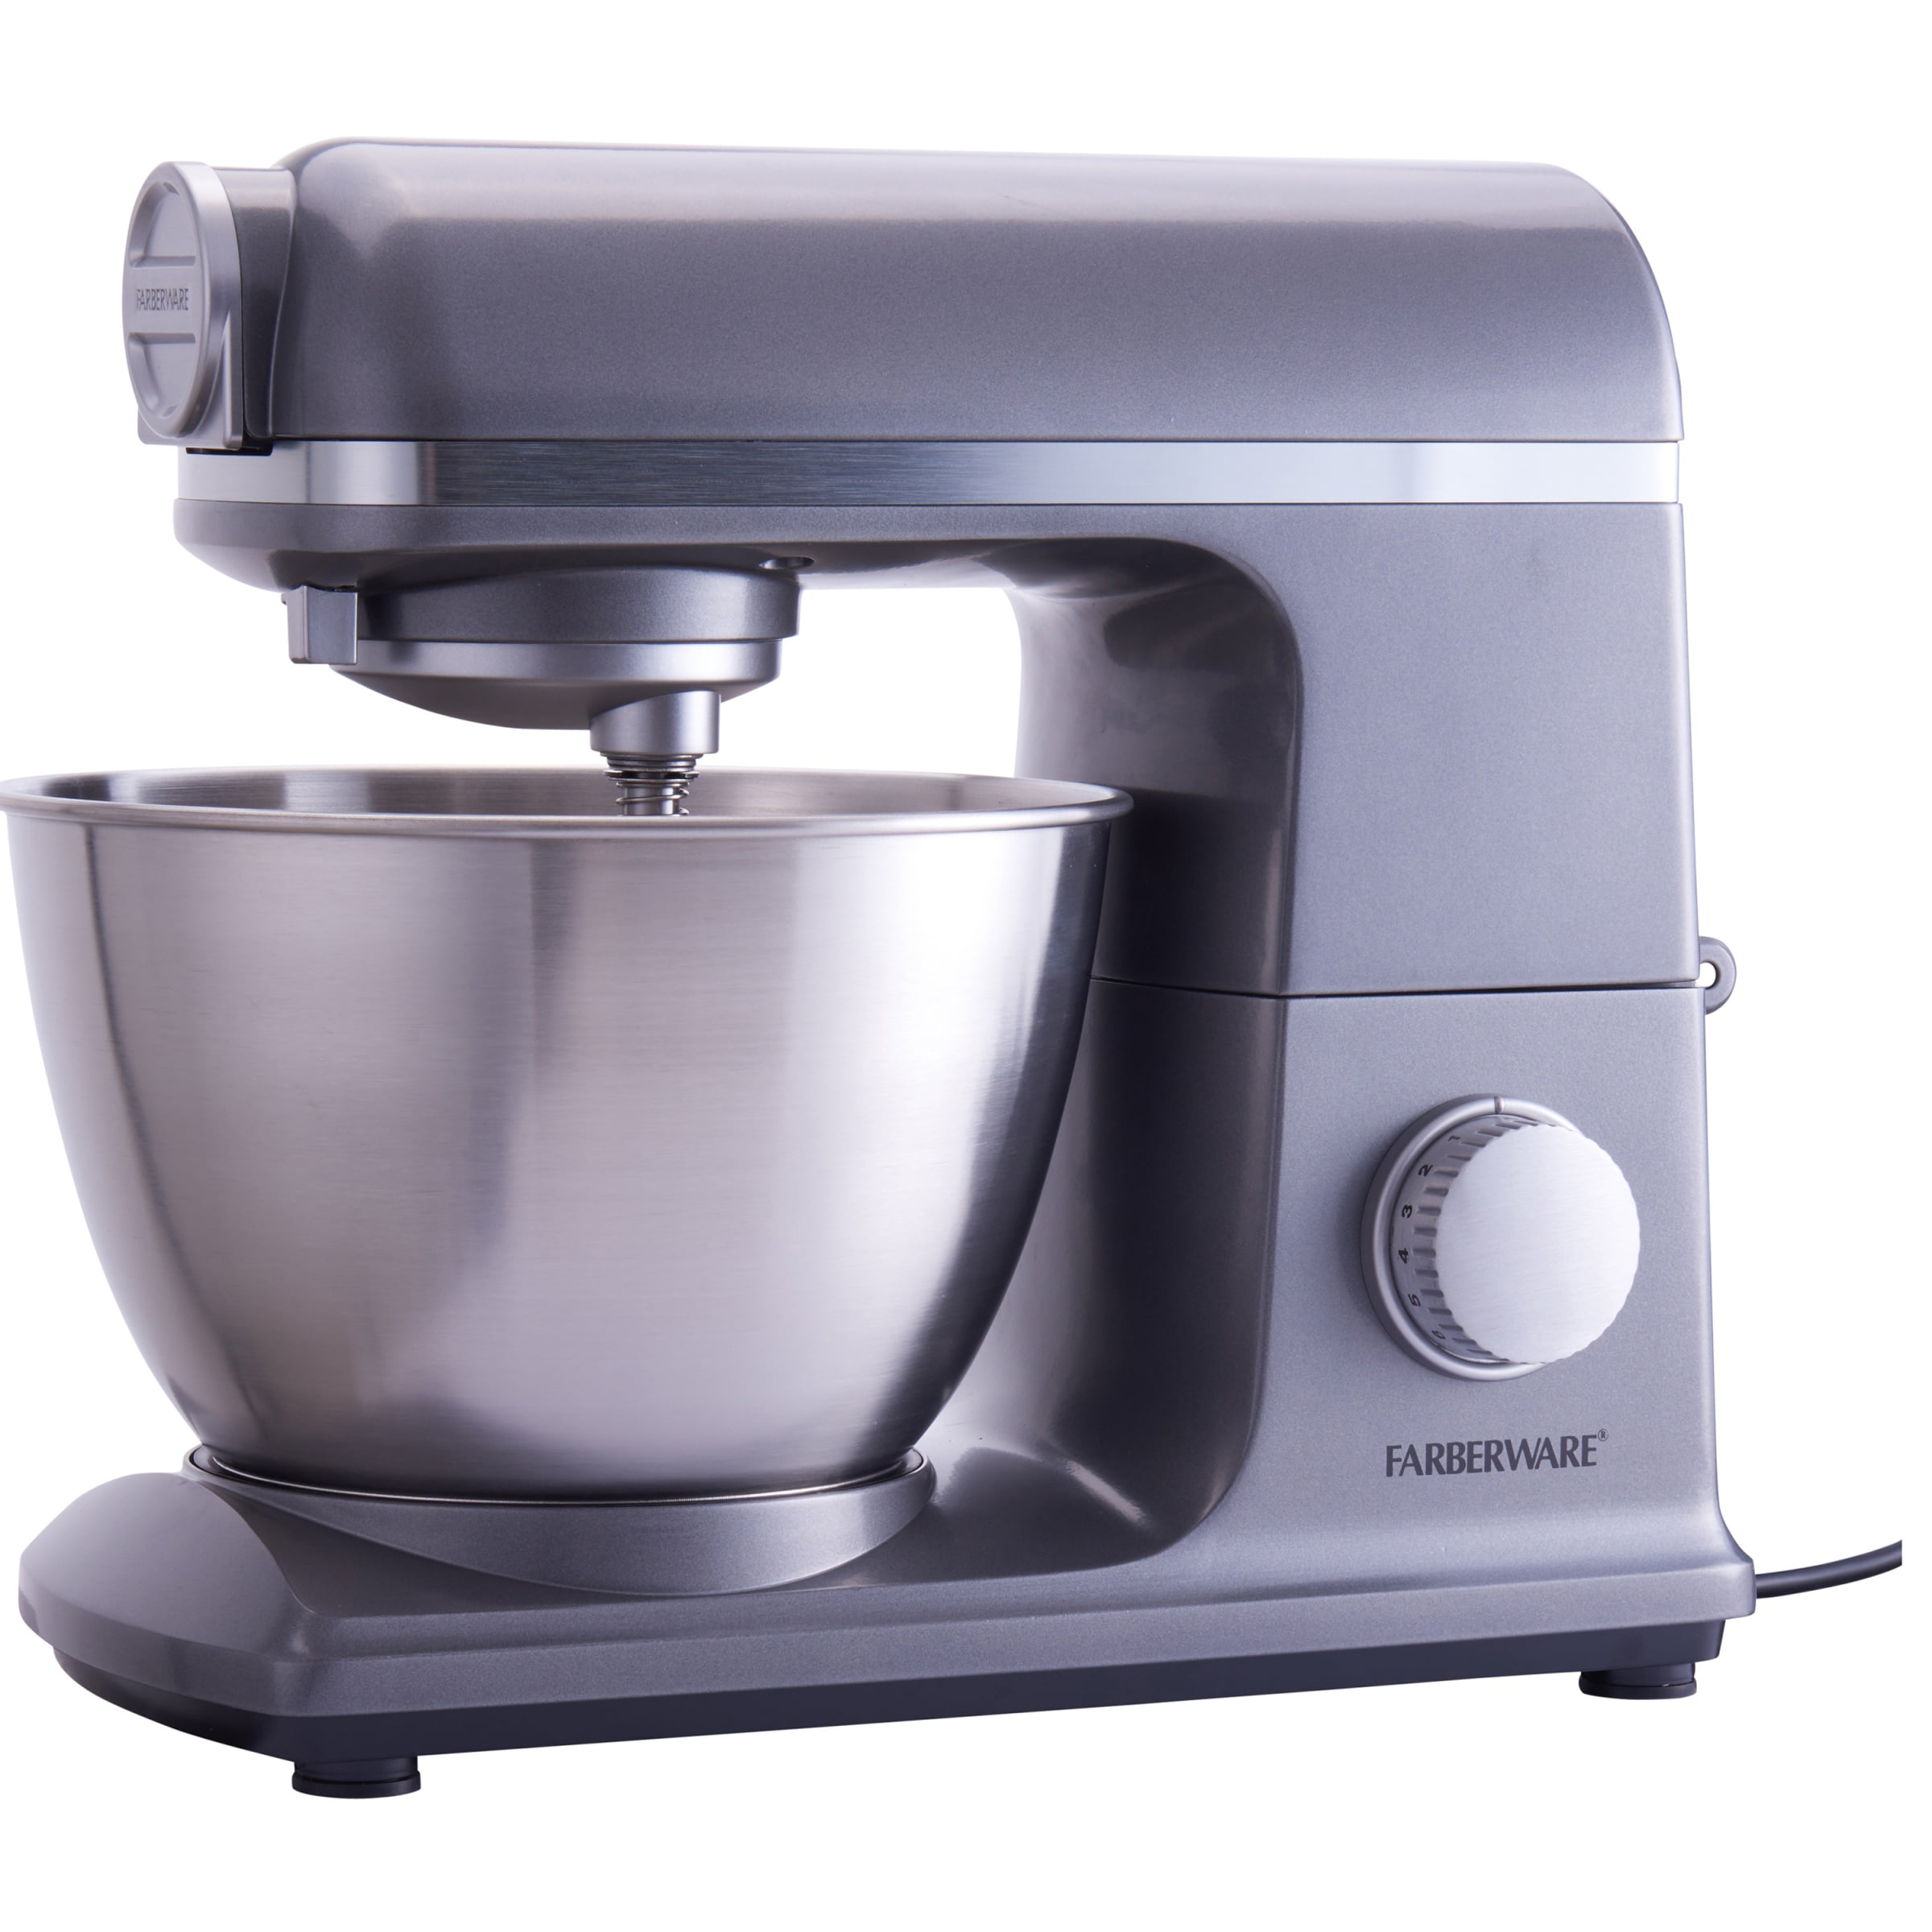 Has anyone used the Farberware stand mixer? : r/Cooking